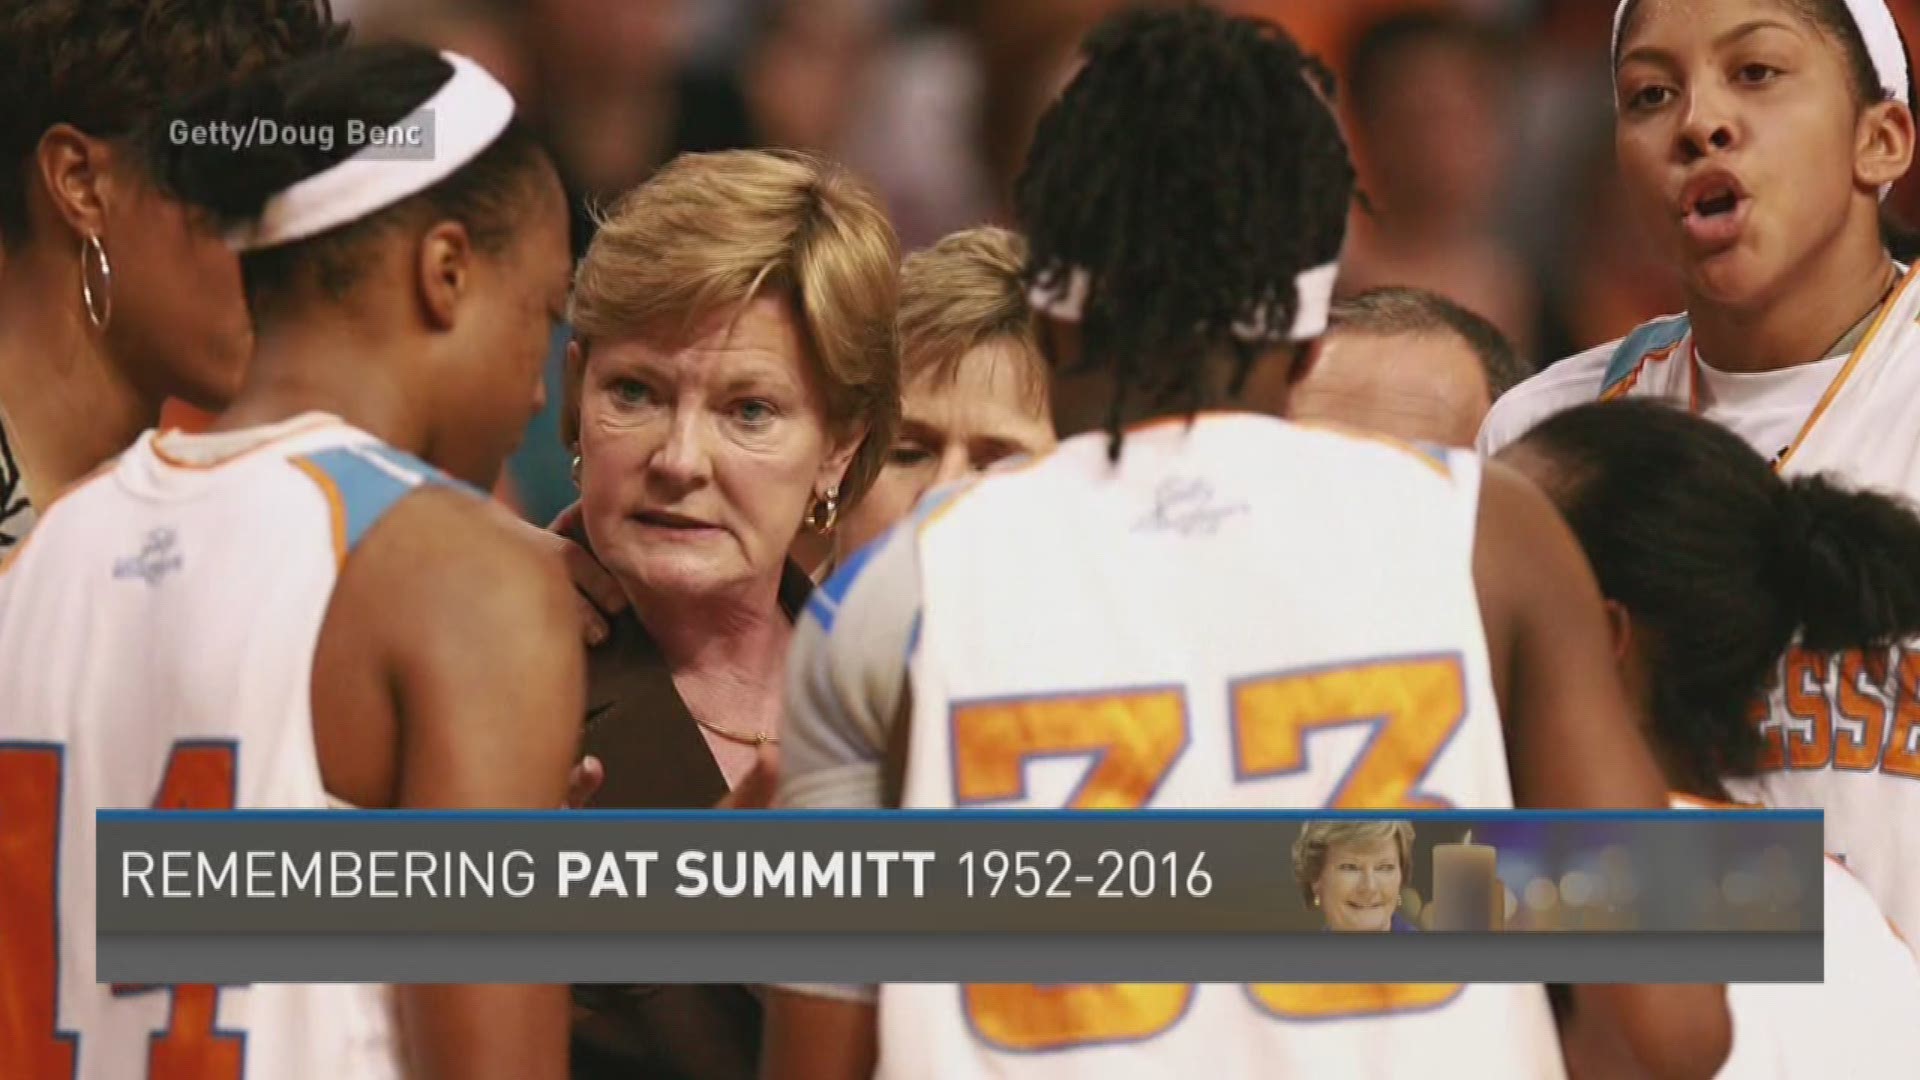 Several people have shared their favorite memories of Coach Patt Summitt with us, including sports talk show host, Wes Rucker, Voice of the Vols, Bob Kesling, and longtime sportswriter Maria Cornelius, who just finished writing a book about Pat Summitt's